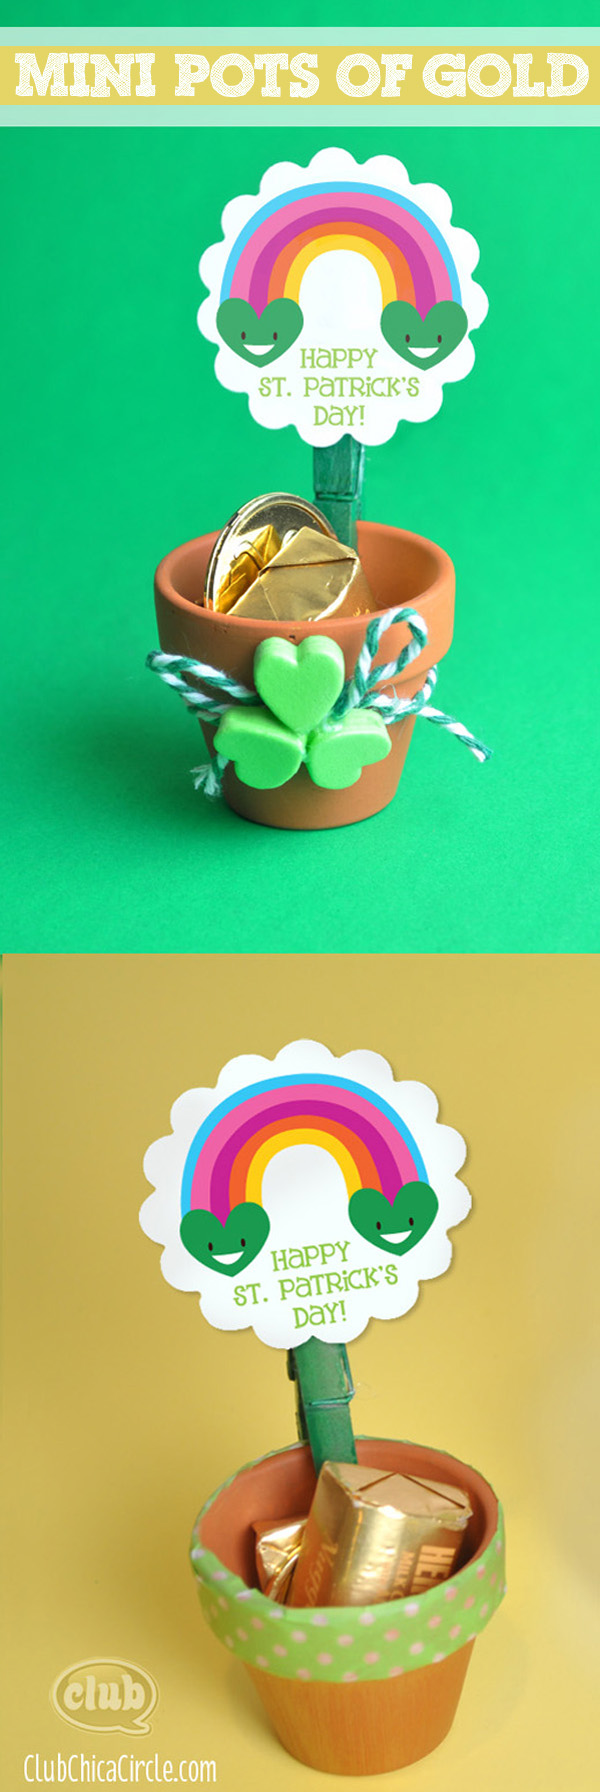 Mini Pot of Gold craft idea with Smiling Rainbow Printable @clubchicacircle 2